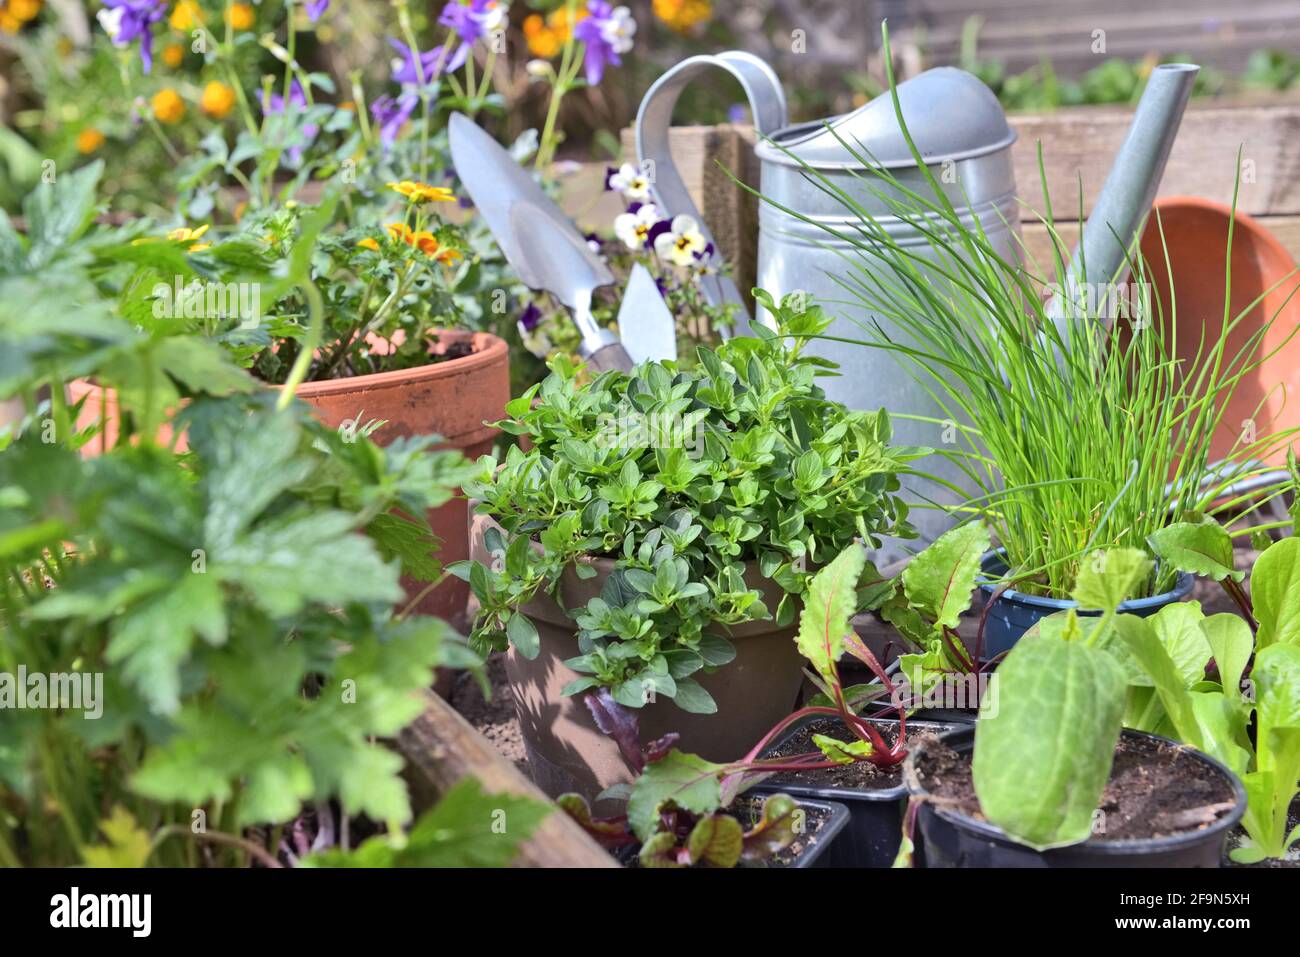 oregano among vegetable seedlings and aromatic plant with gardening equipment in a garden Stock Photo